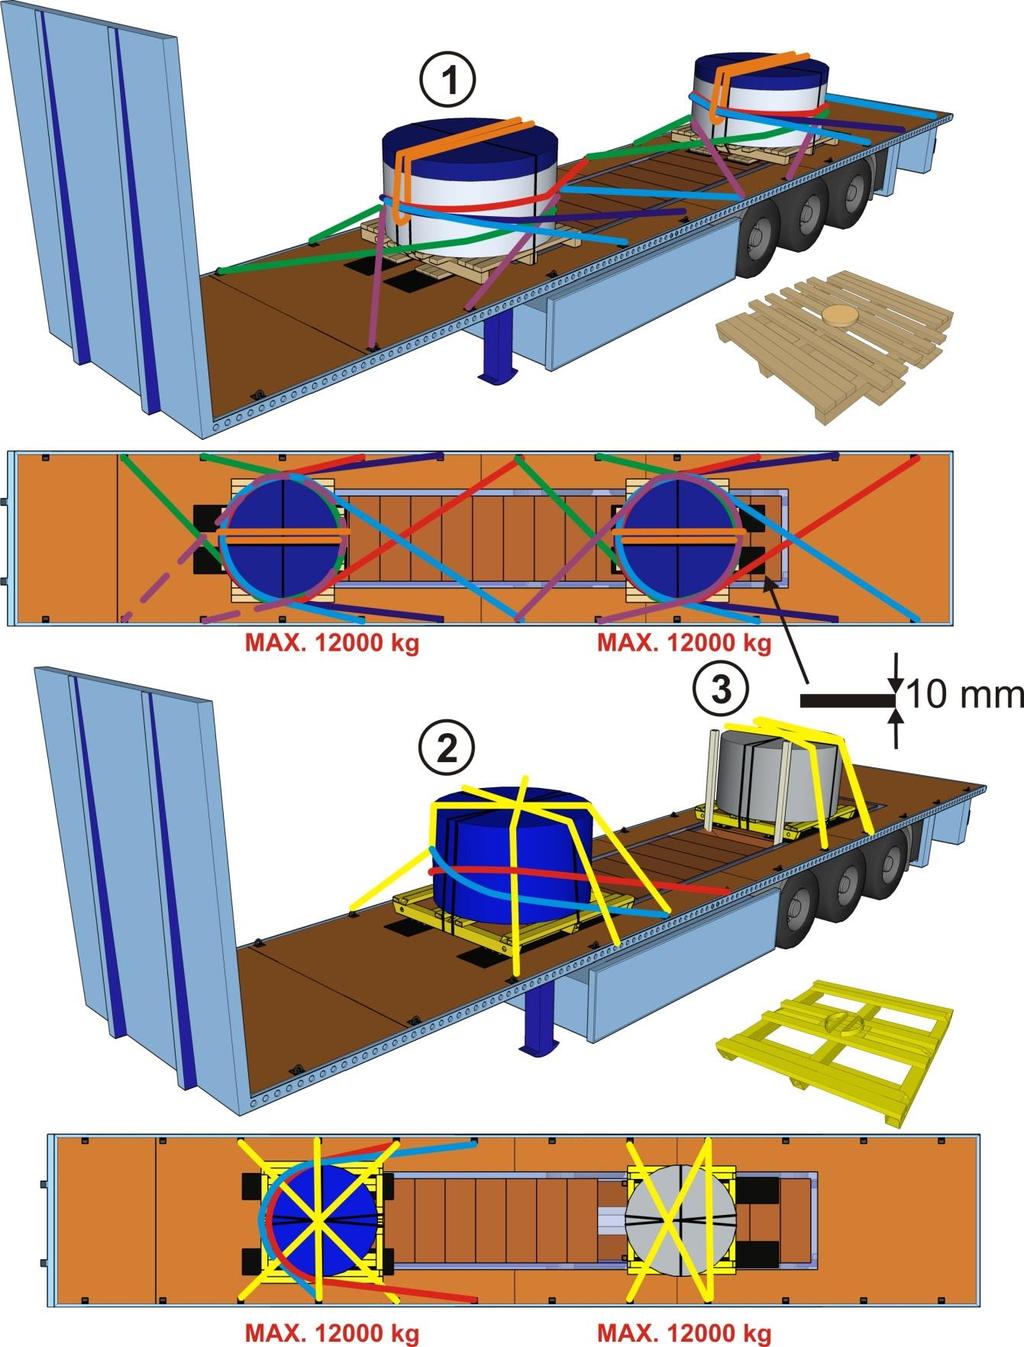 CARGO SECURING EXAMPLES OF COLD-ROLLED TIN PLATES ON PALLETS Lashing angles = max. 35, x for lashings forwards = max. 40, x,y for lashing rearwards/sideways = max. 60 1.